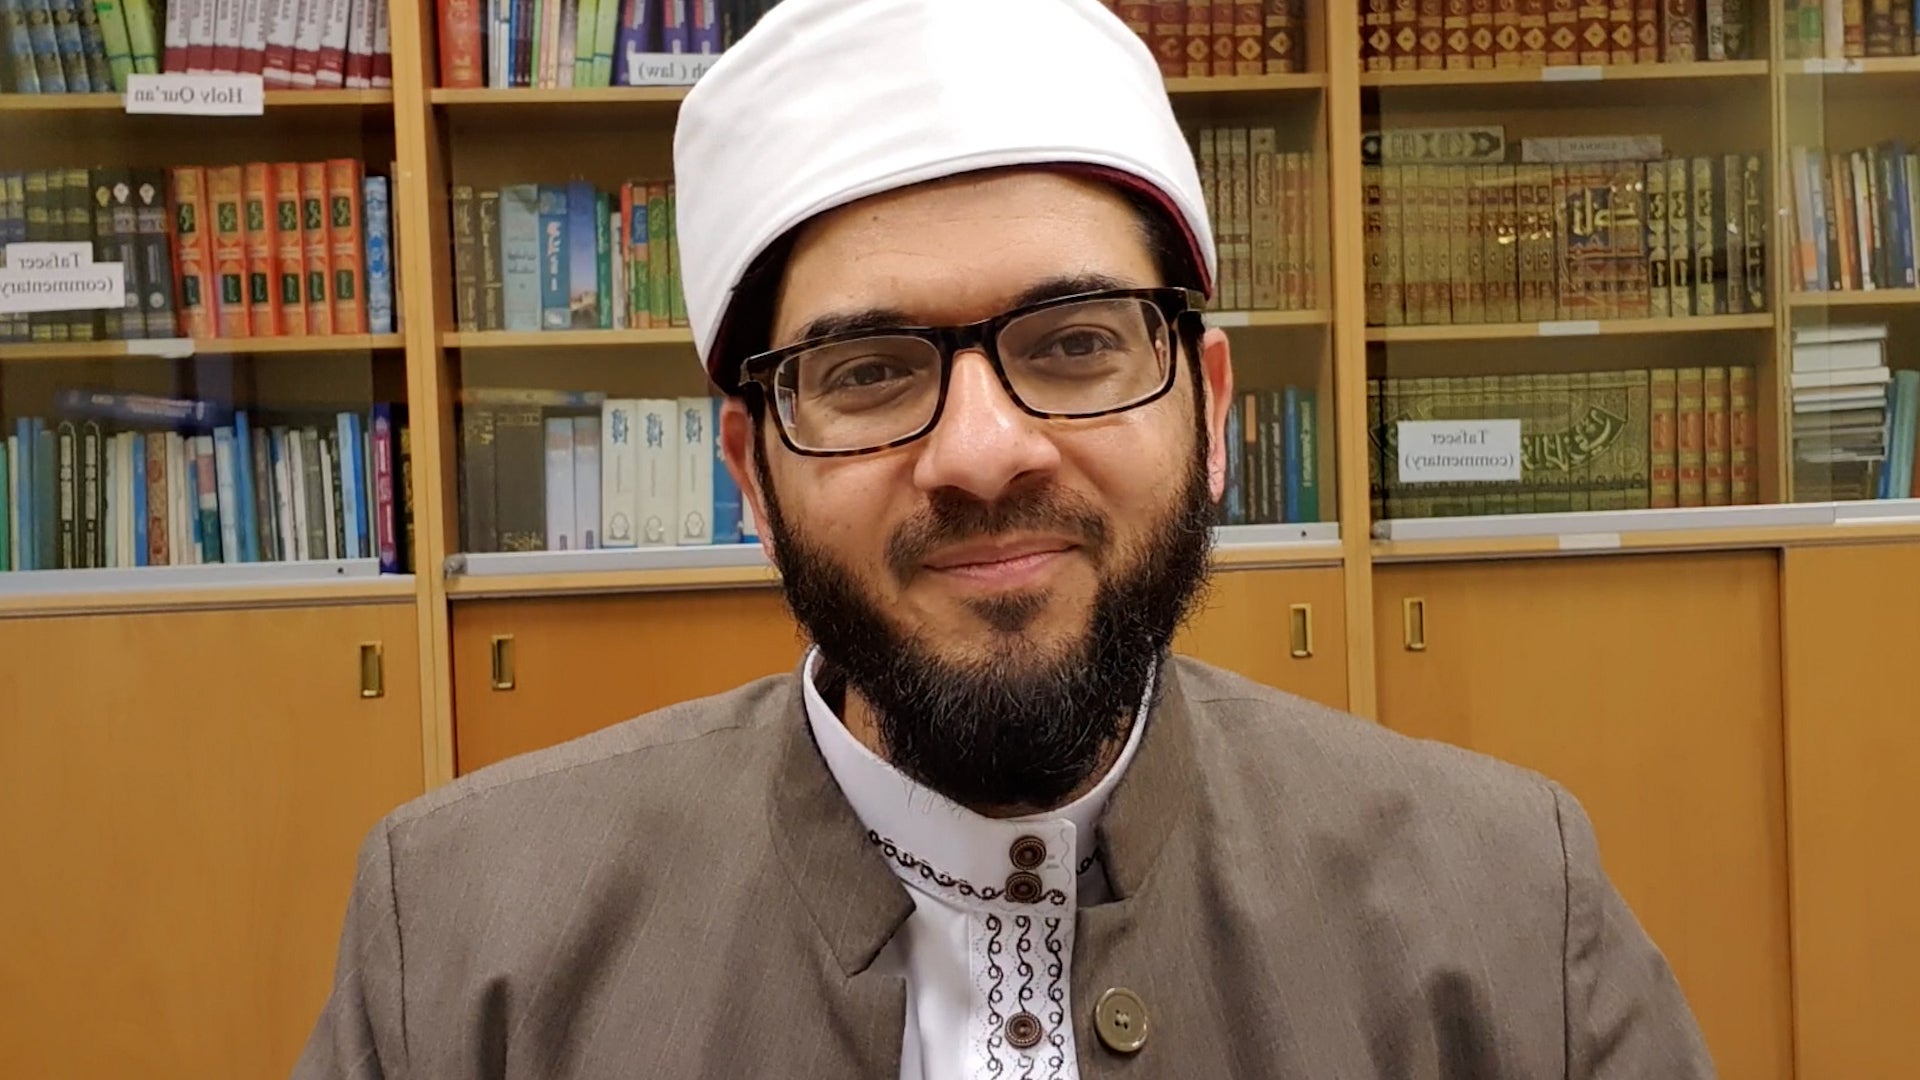 Imam Qari Asim has said Eid celebrations will be ‘monumental’ this year as Muslims enjoy the first holiday without Covid-19 restrictions since the pandemic began (PA)